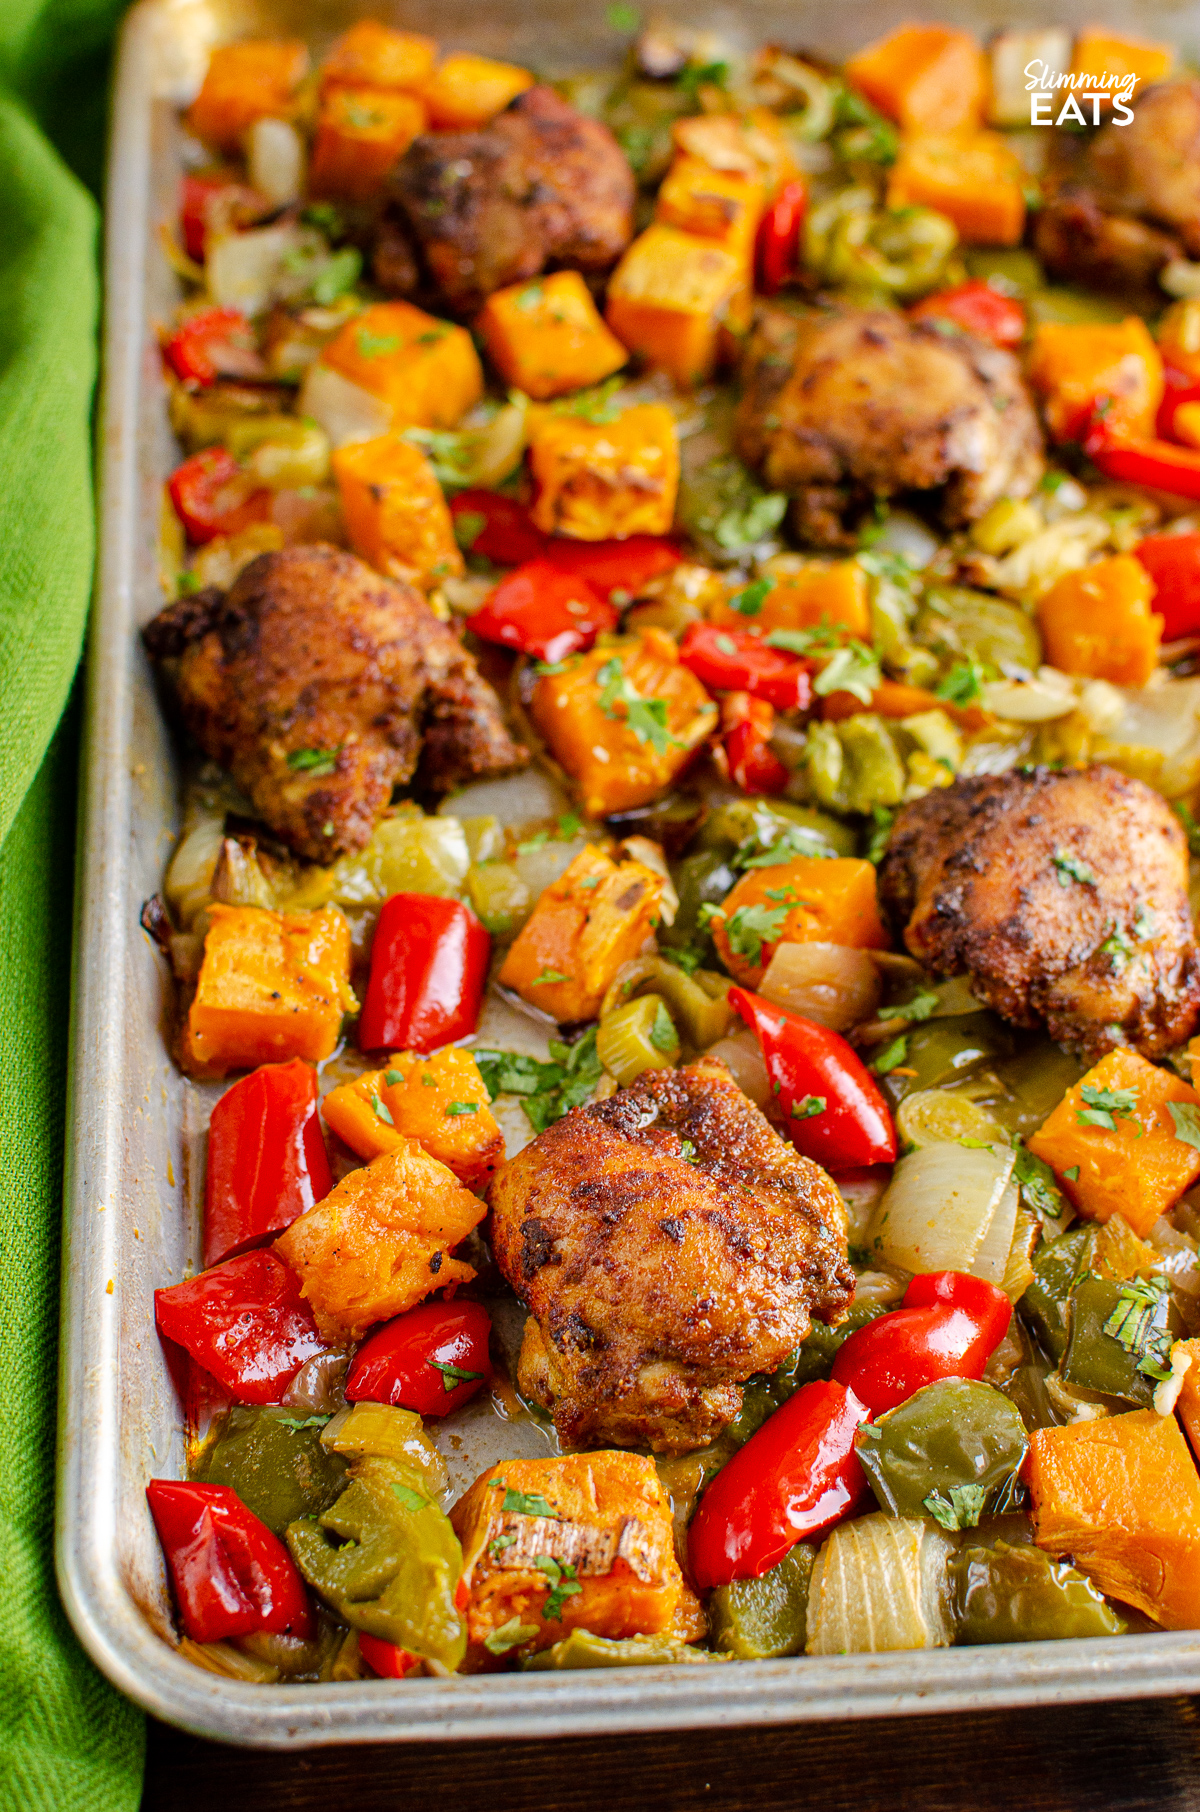 Seasoned Chicken and Roasted Sweet Potato and vegetables baked on a Tray